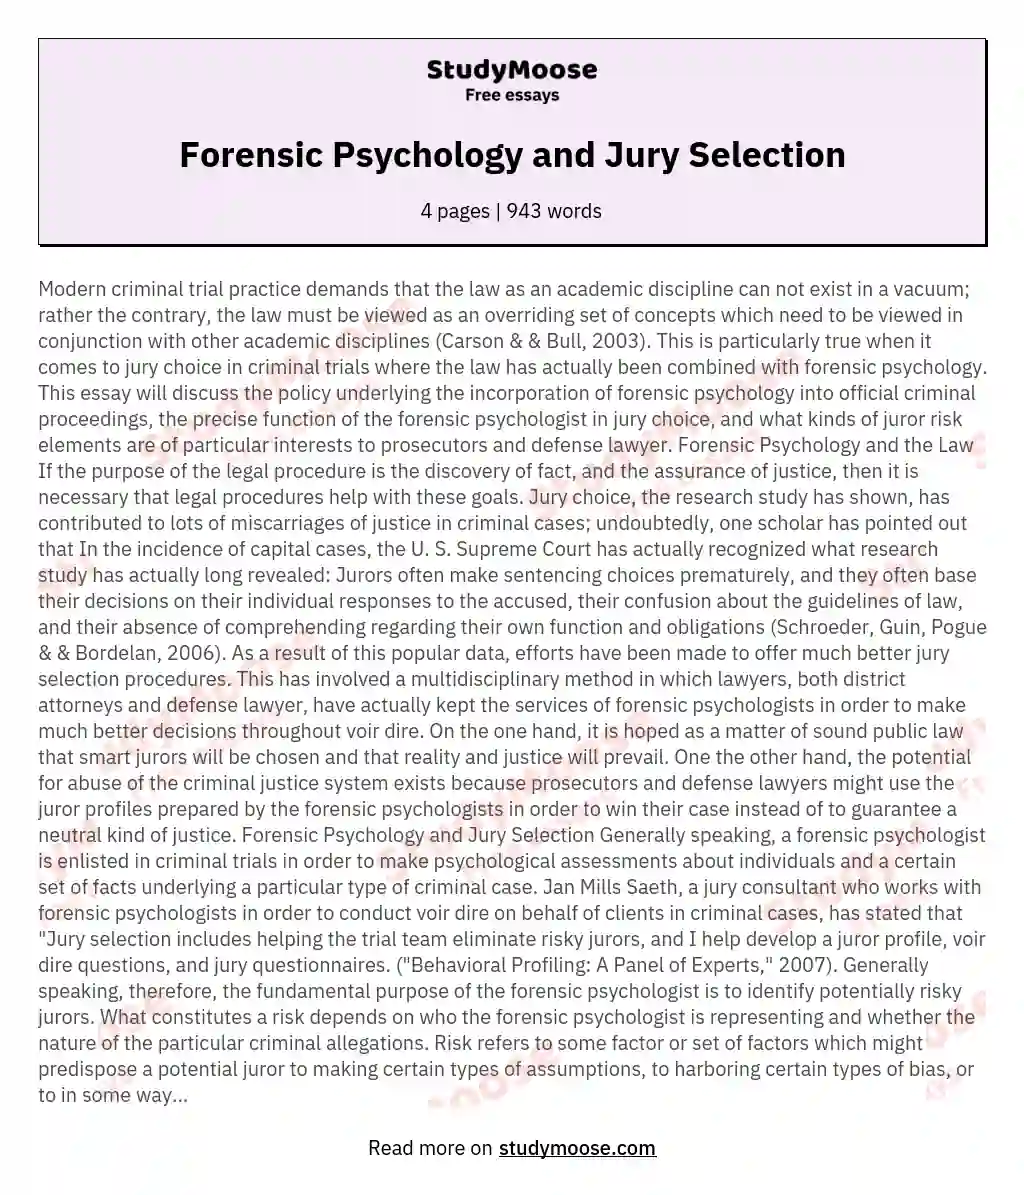 Forensic Psychology and Jury Selection